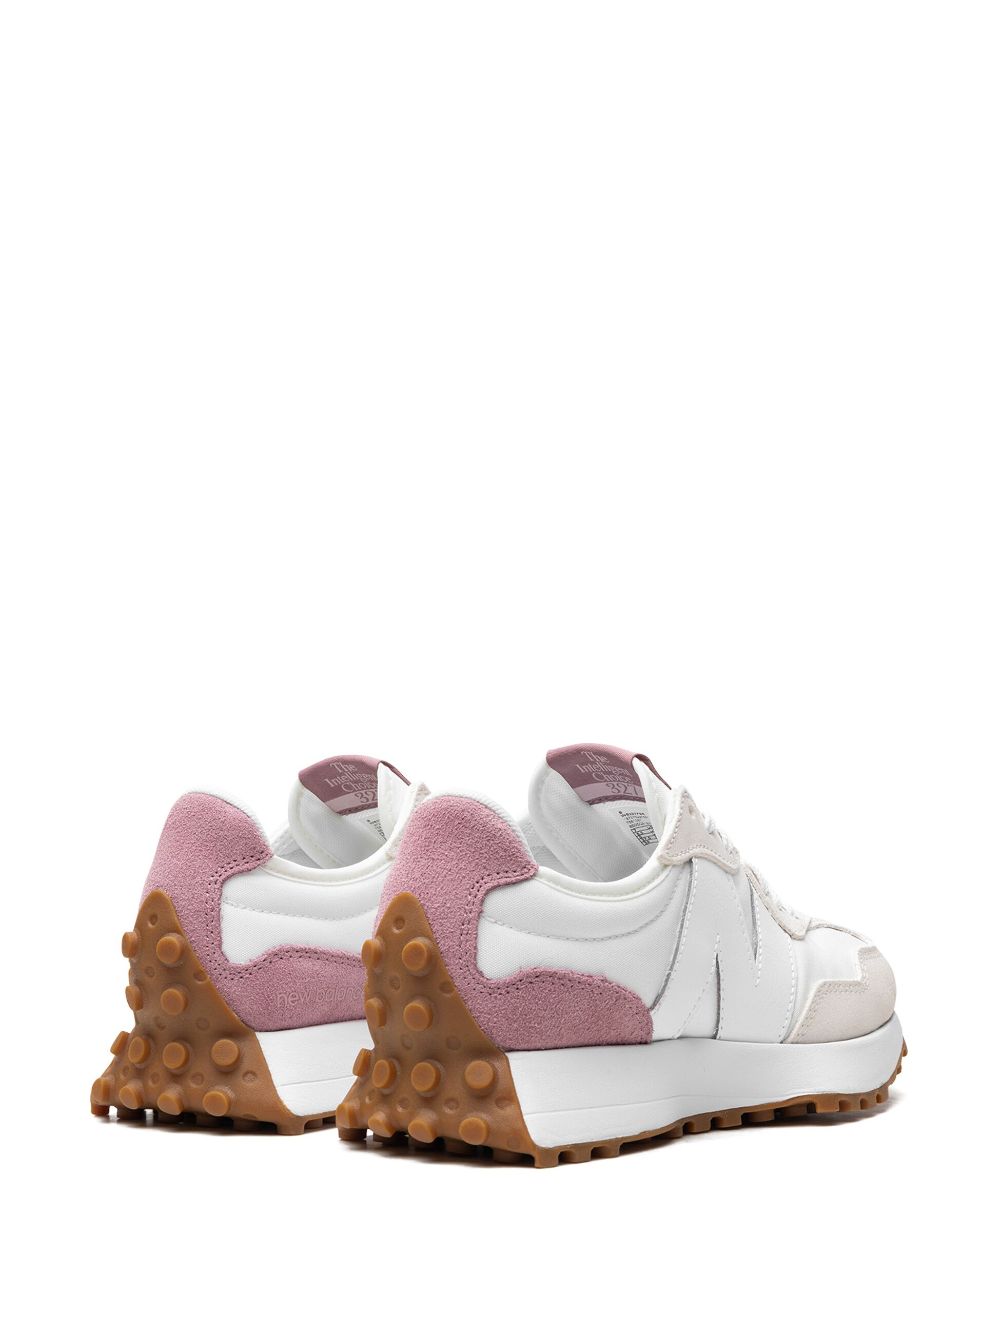 Shop New Balance 327 "white/pink" Sneakers